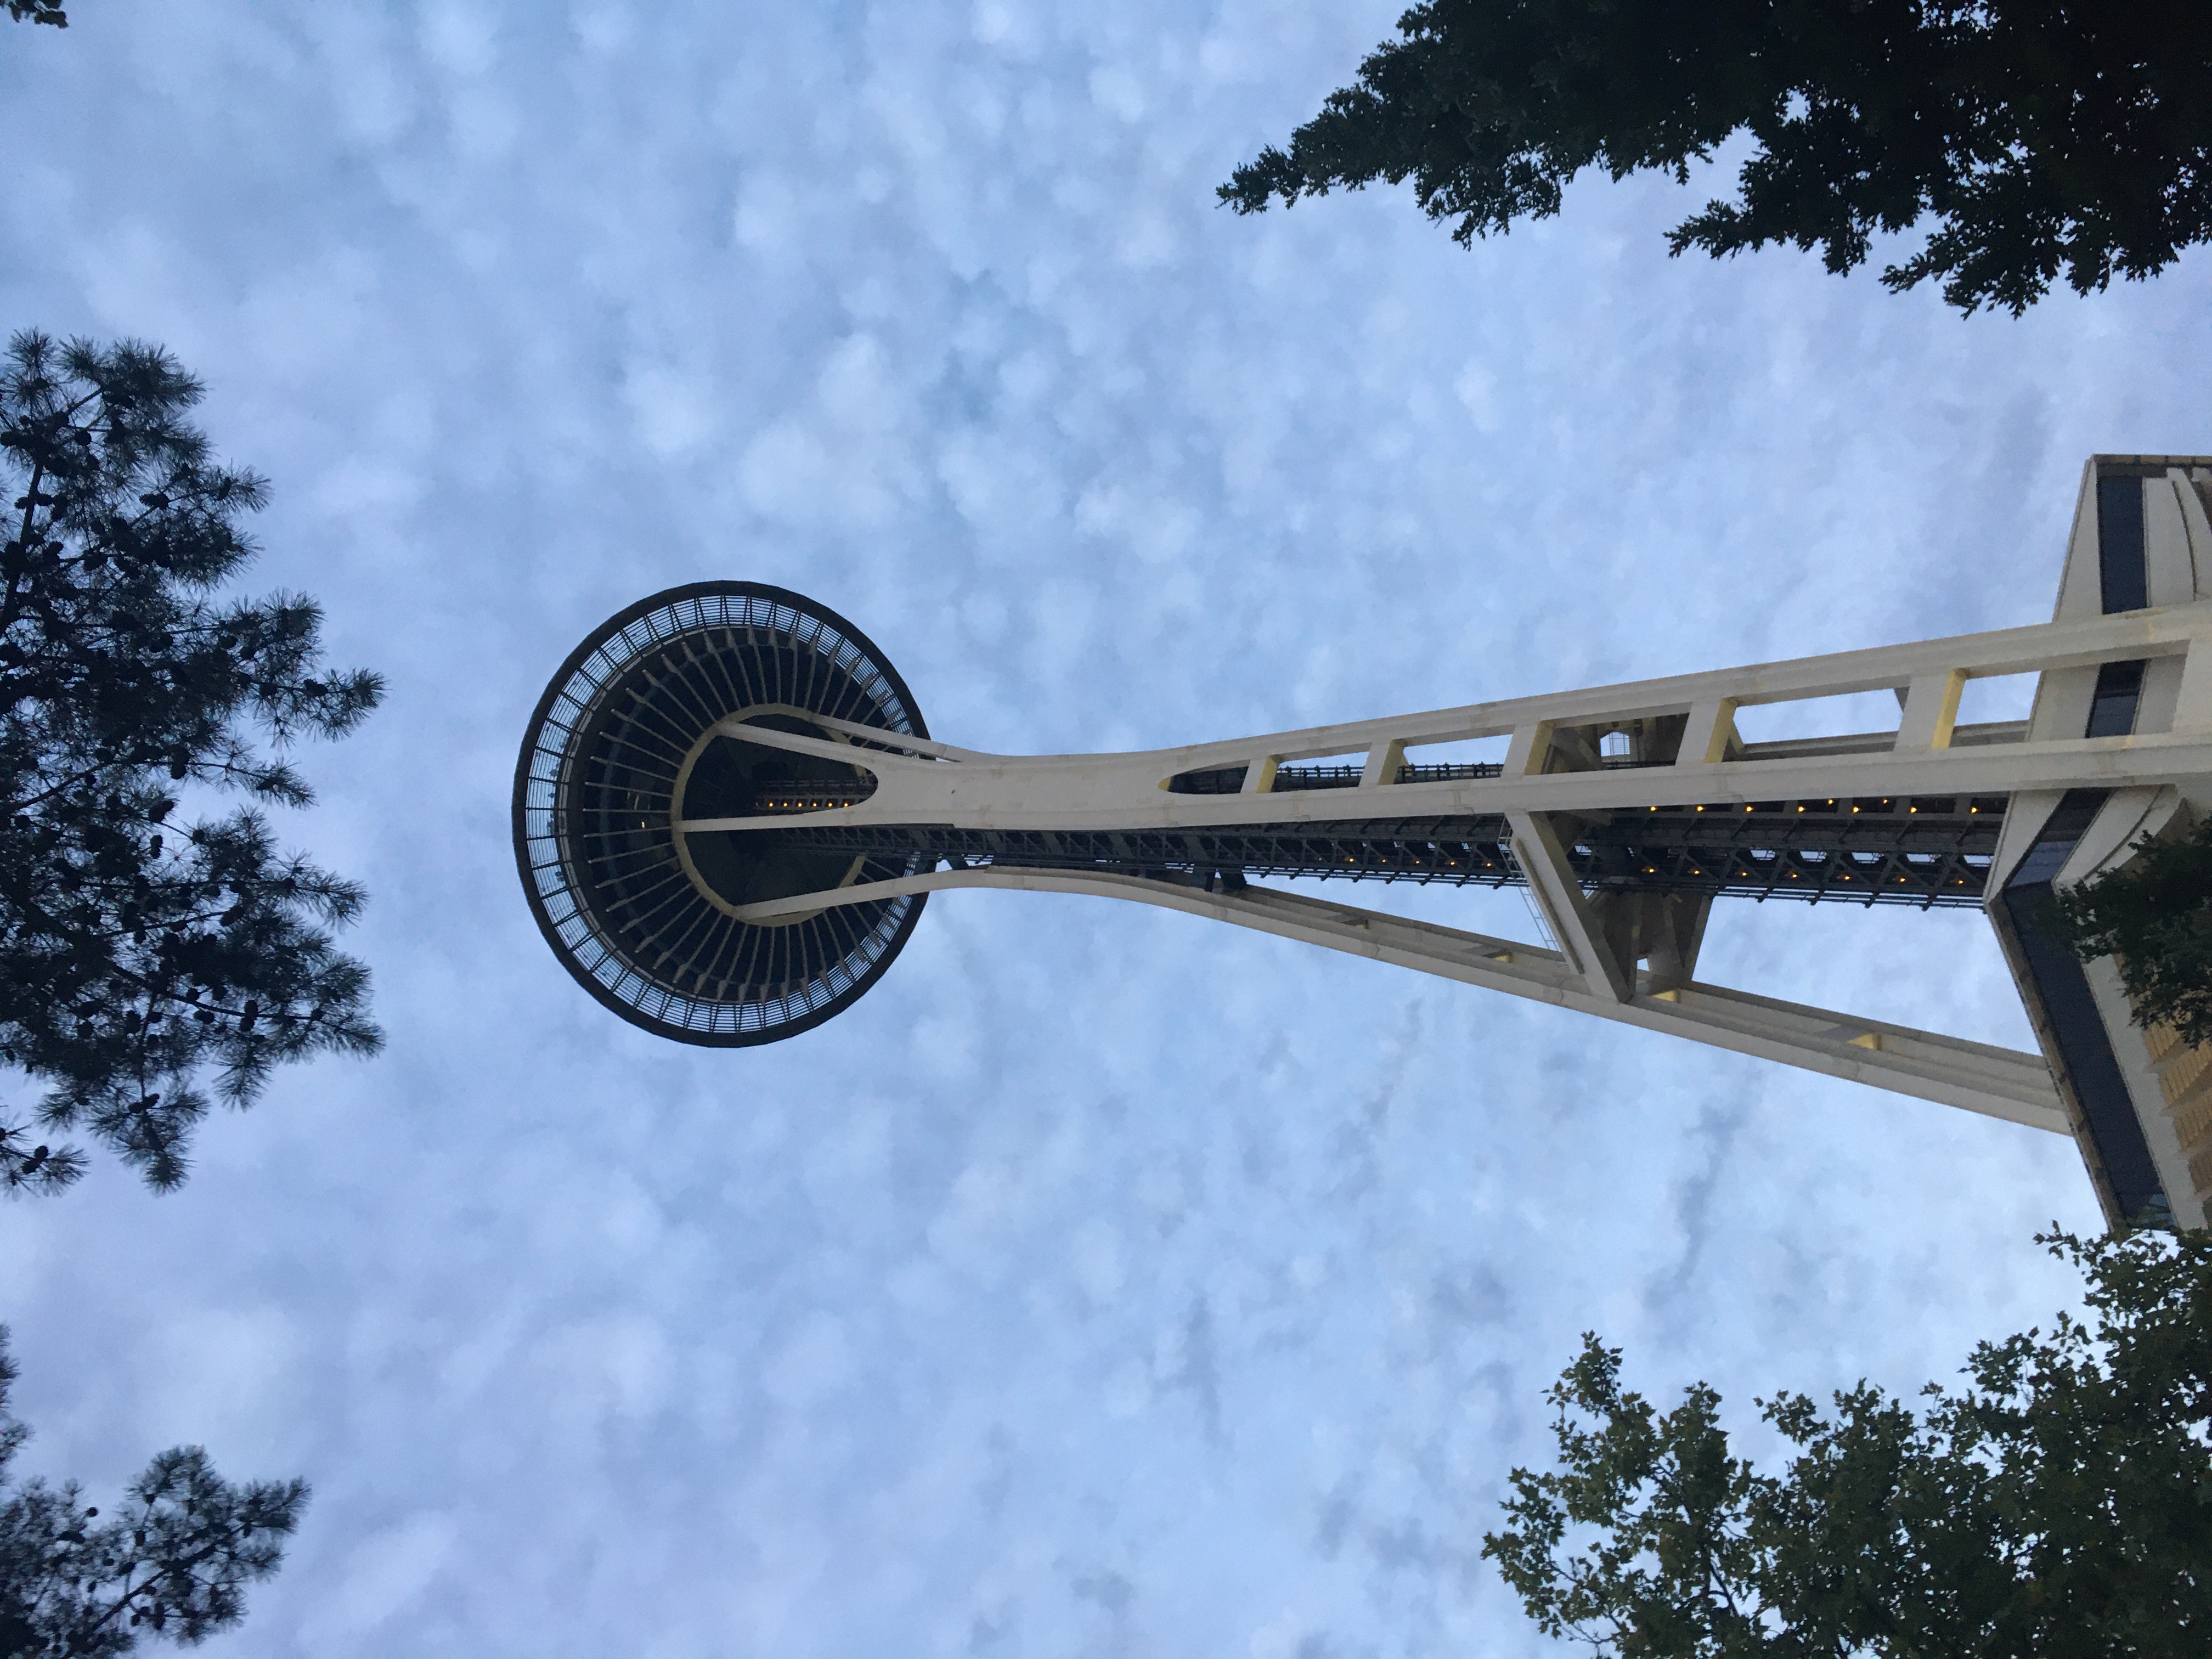 View looking up at the Space Needle tower, from a position near its base